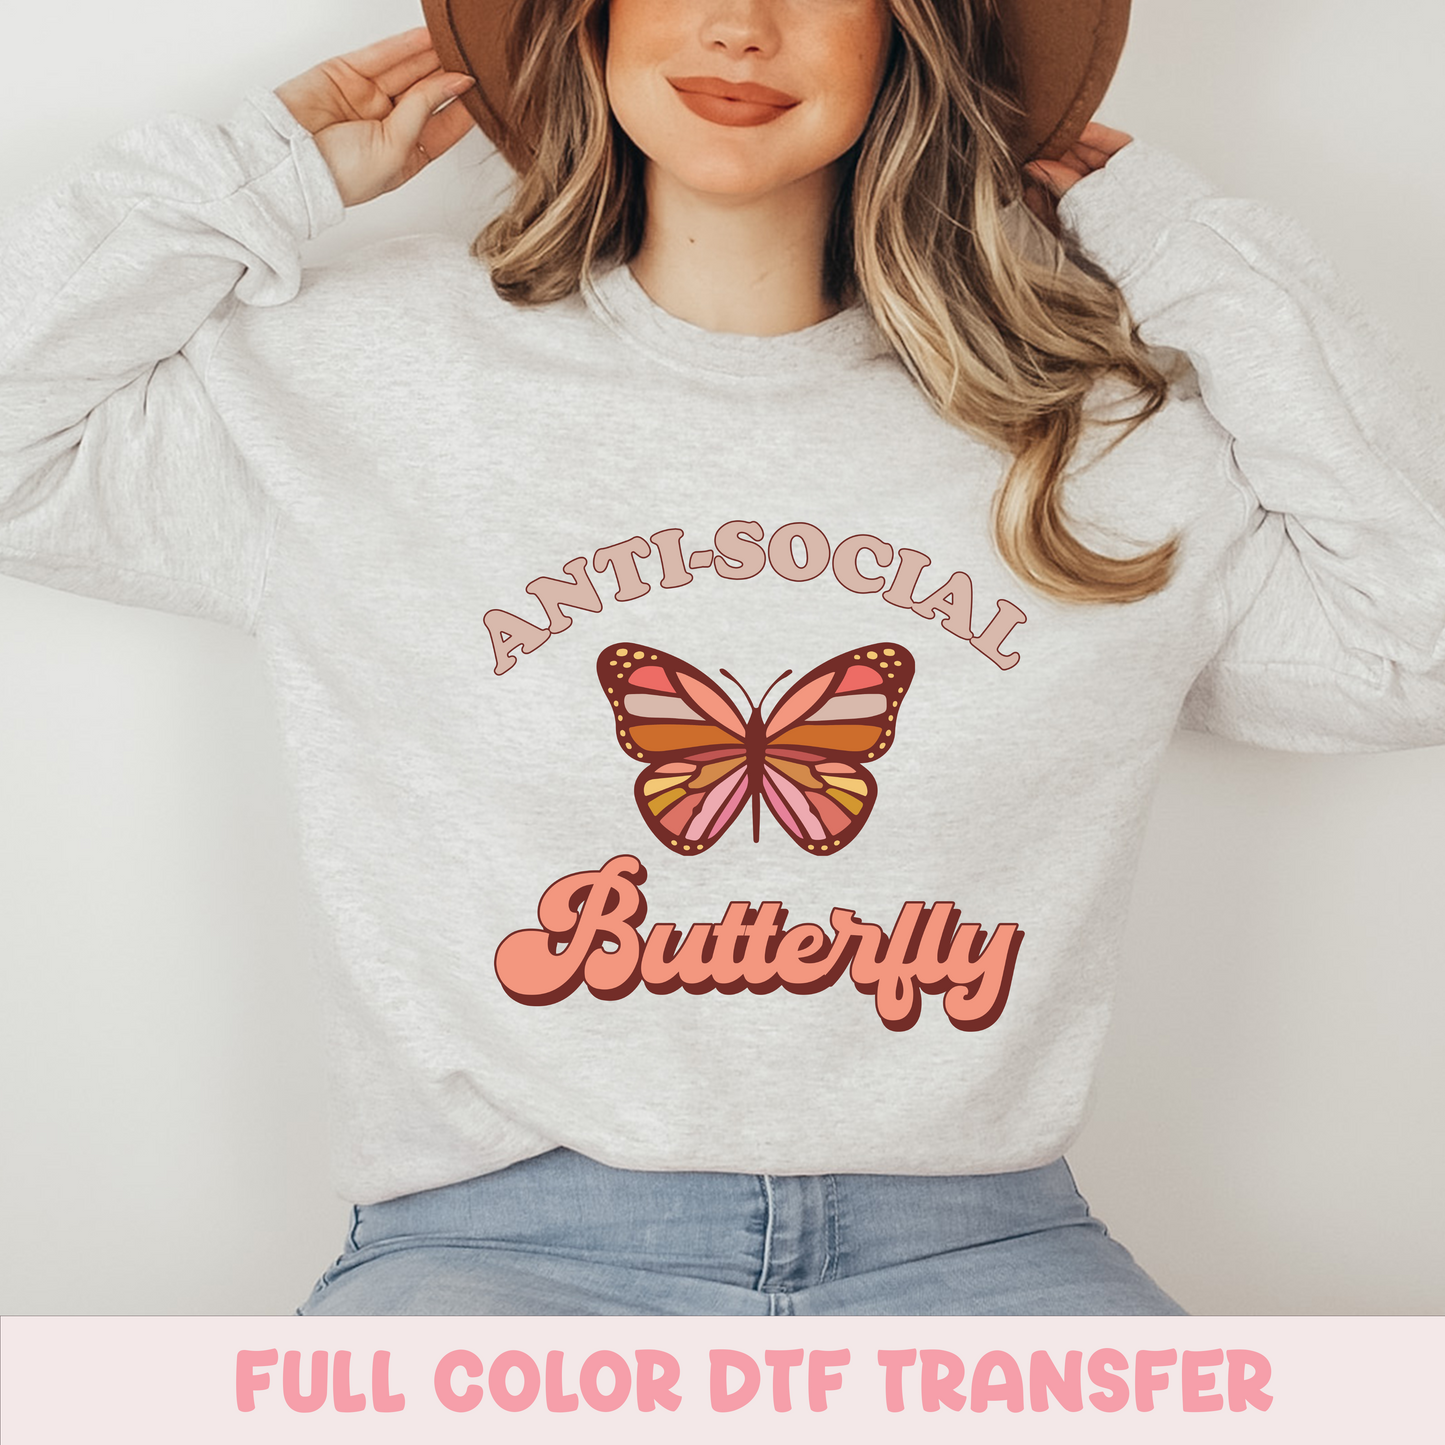 Anti-social Butterfly - FULL COLOR DTF TRANSFER (Ready to Ship)